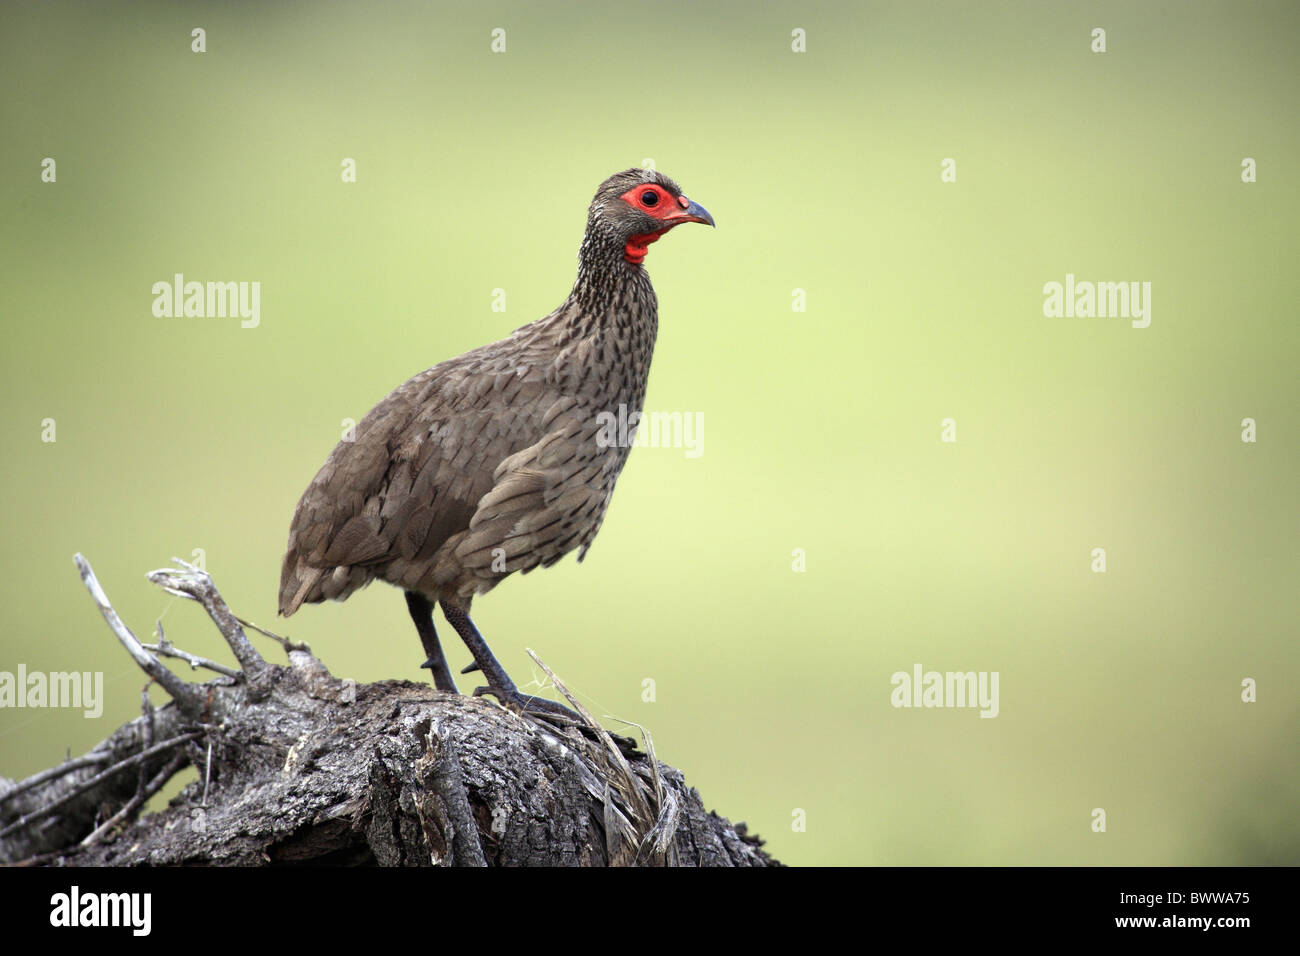 Swainson's Francolin (Francolinus swainsonii) adult, standing on branch, Kruger N.P., South Africa Stock Photo